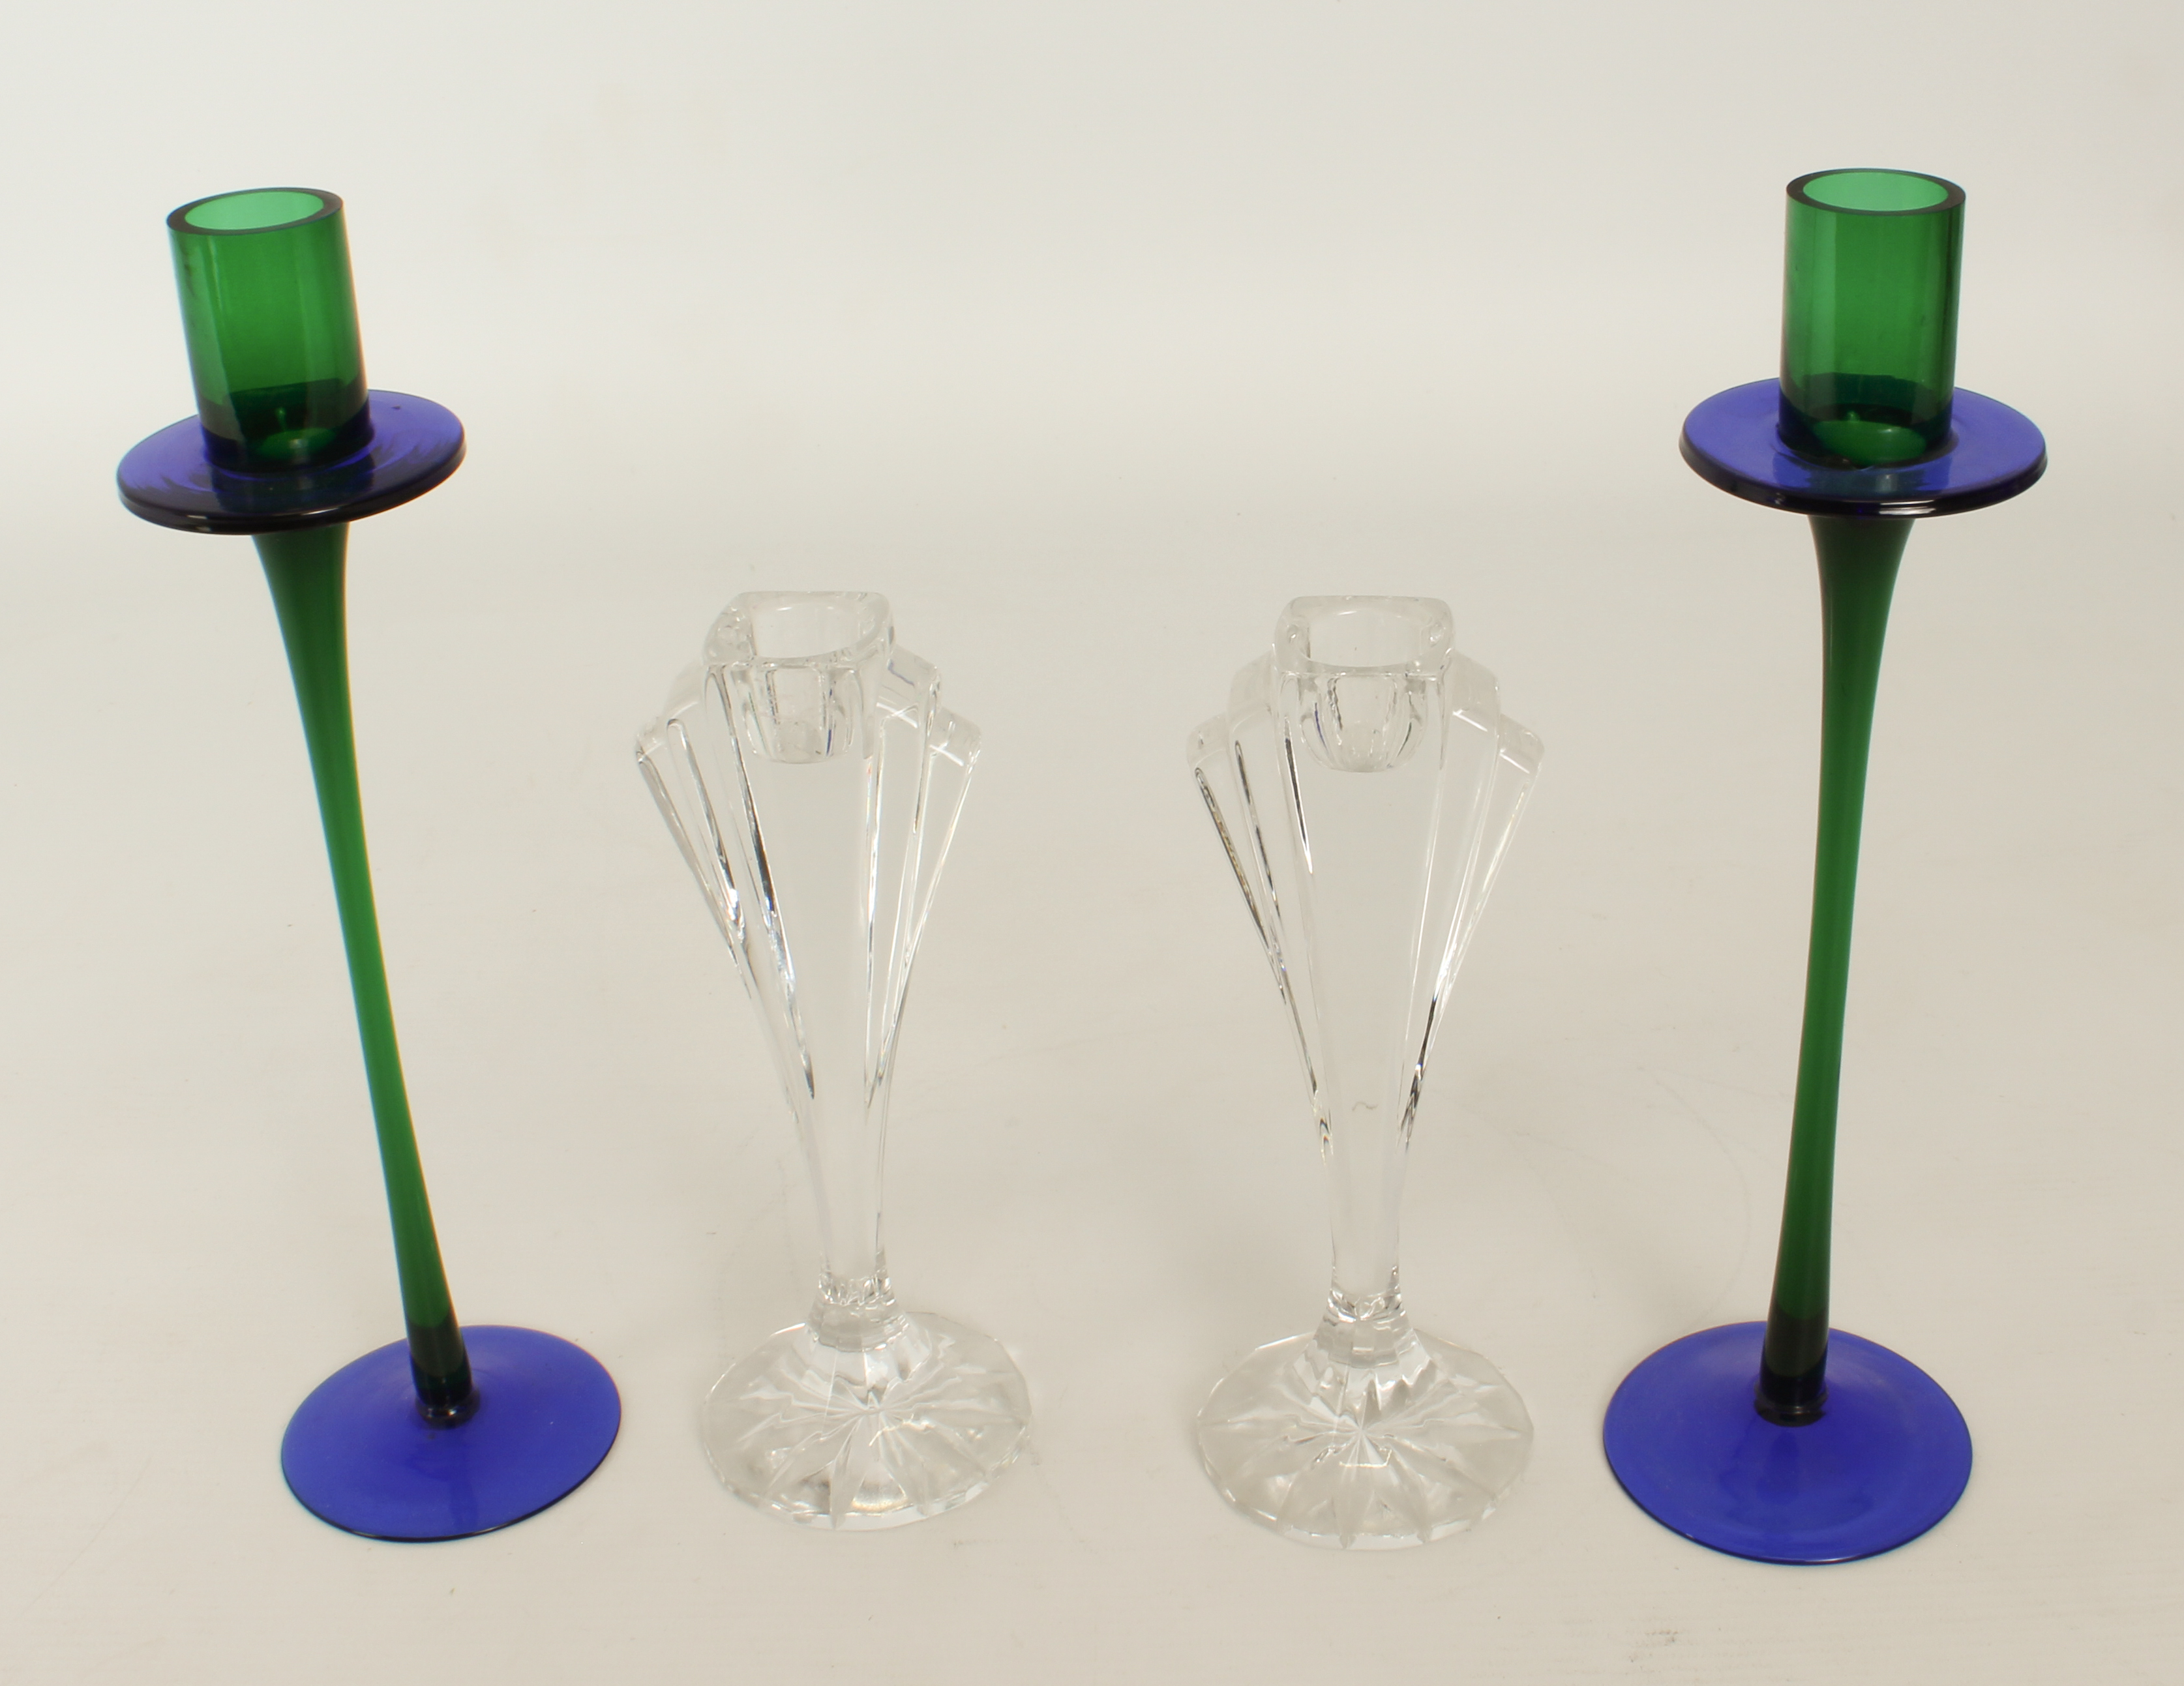 A pair of retro green and blue art glass candlesticks - 1980s, blown glass, with cylindrical nozzles